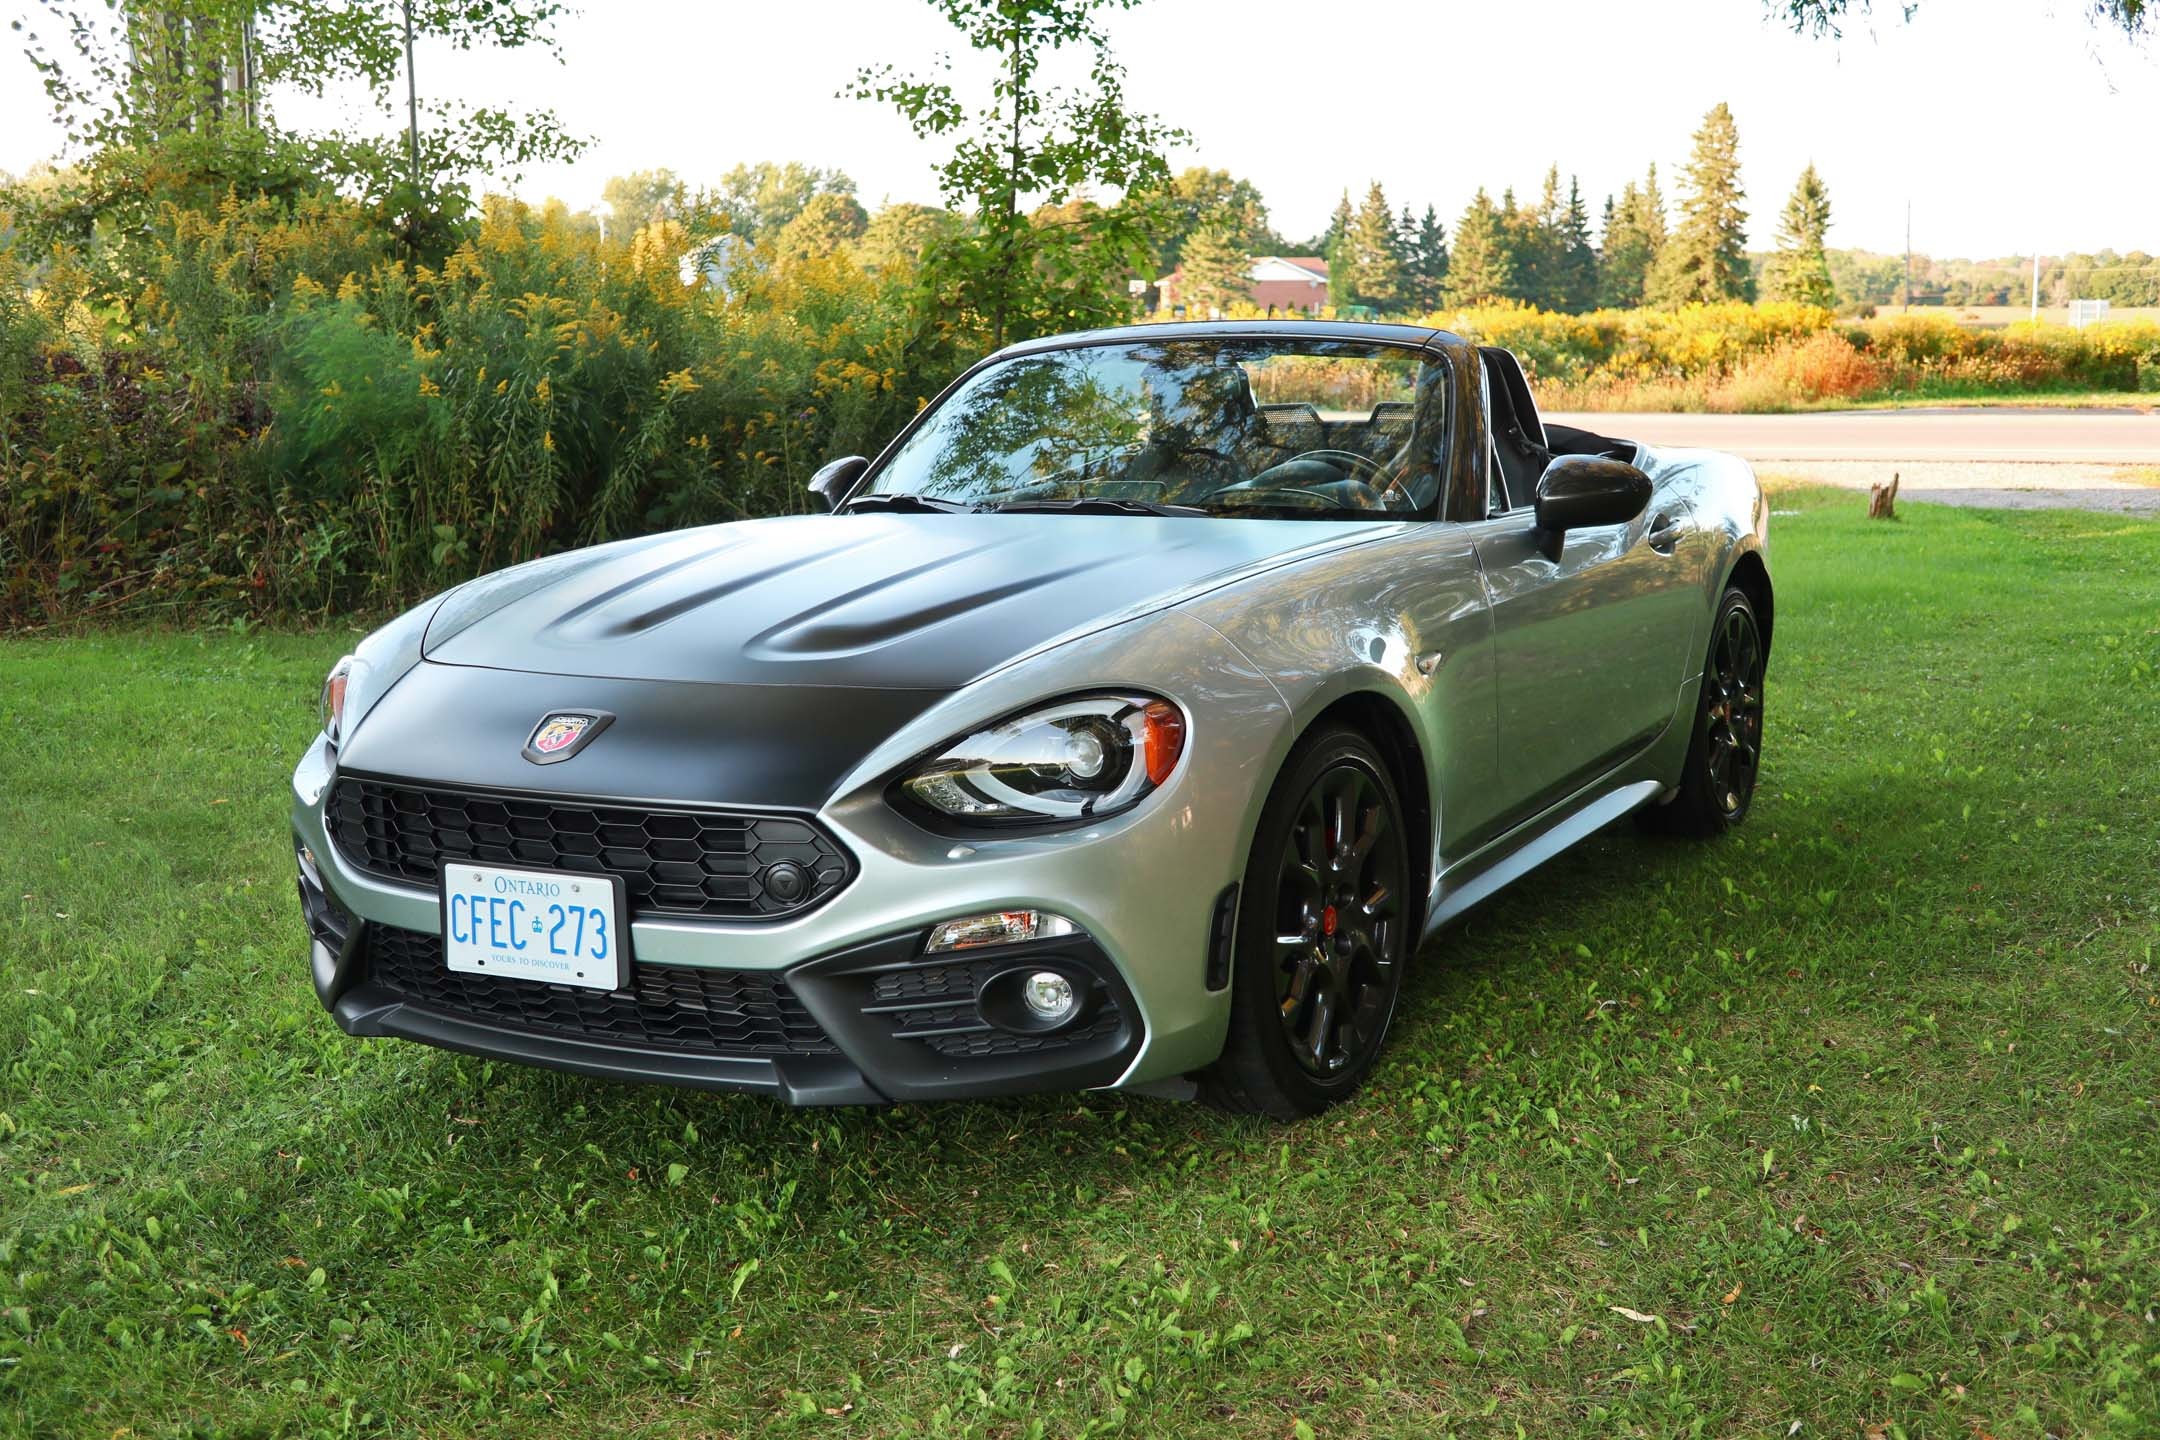 Fiat 124 Spider, Abarth test drive, Expert reviews, Thrilling driving experience, 2160x1440 HD Desktop